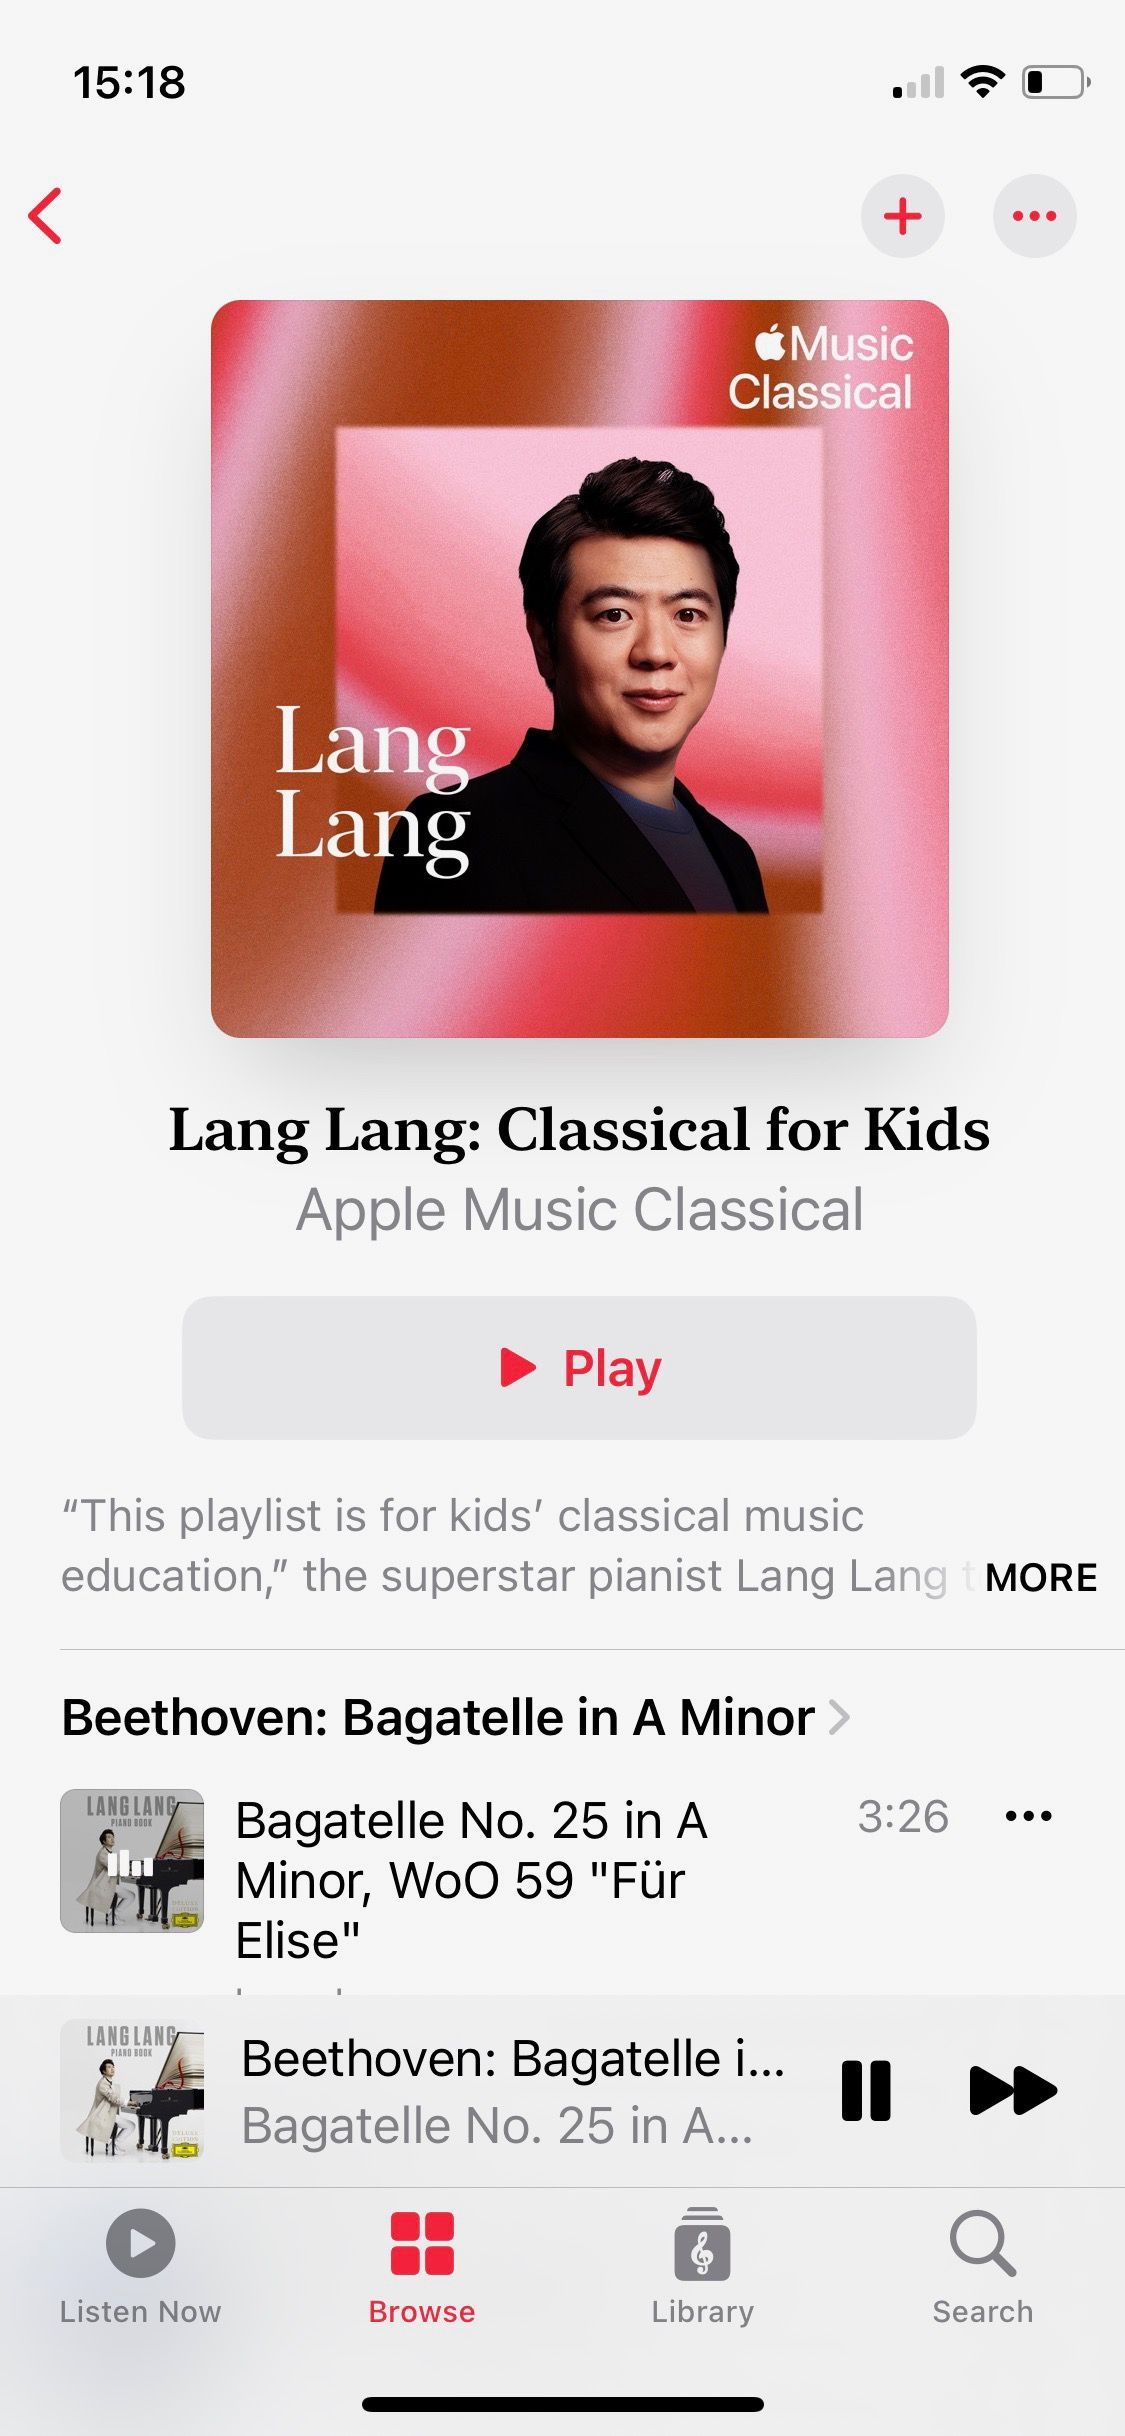 Screenshot of Apple Music Classical Curated collection by Lang Lang